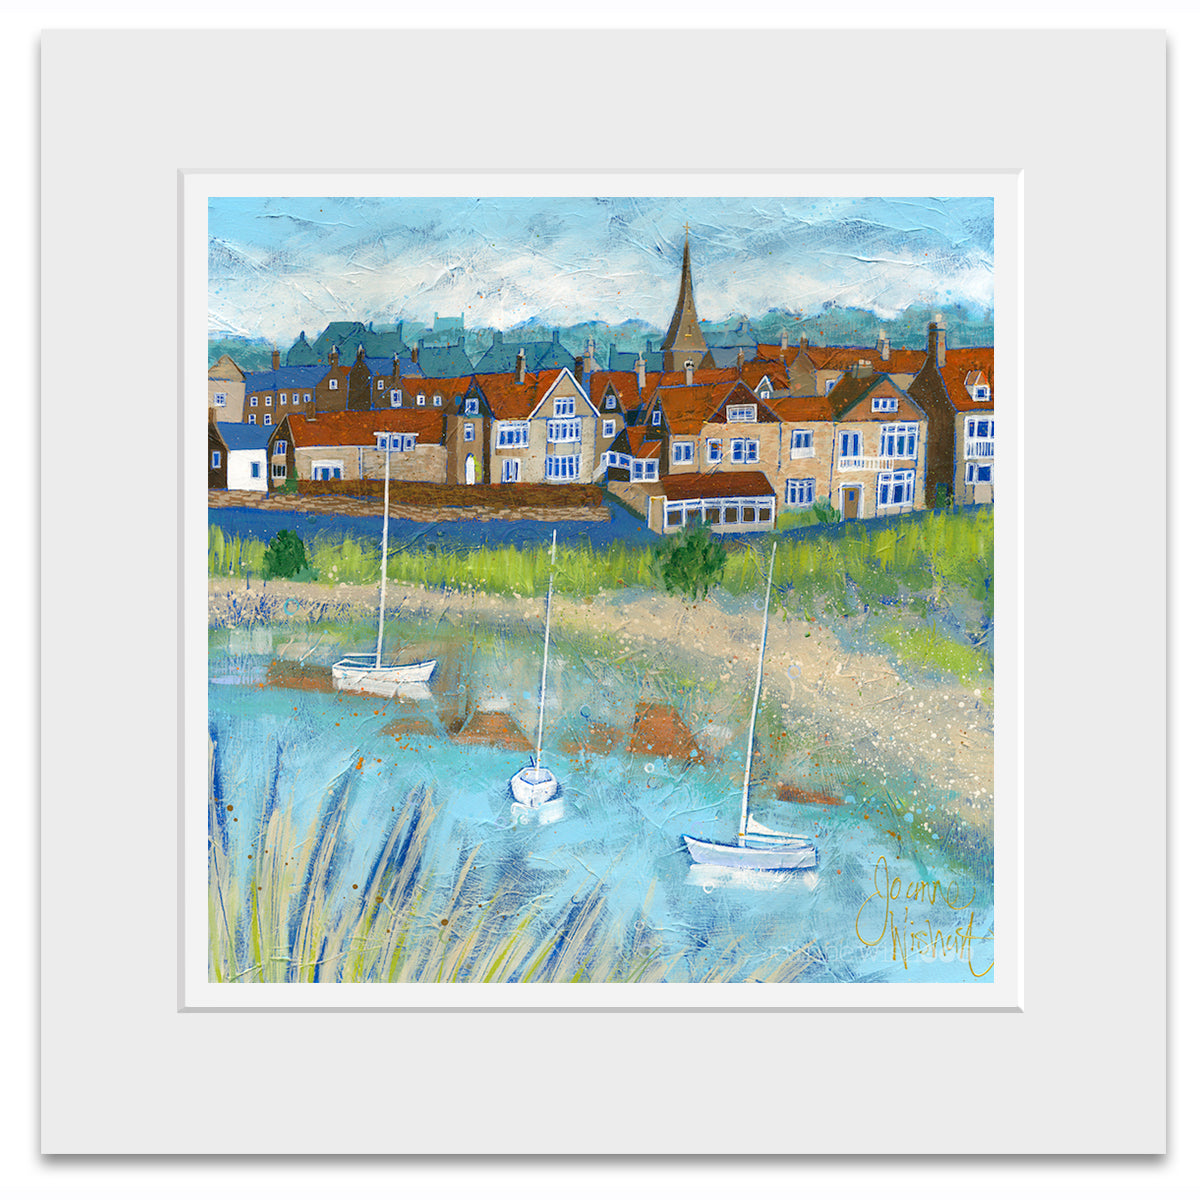 A mounted print of Alnmouth village in Northumberland.